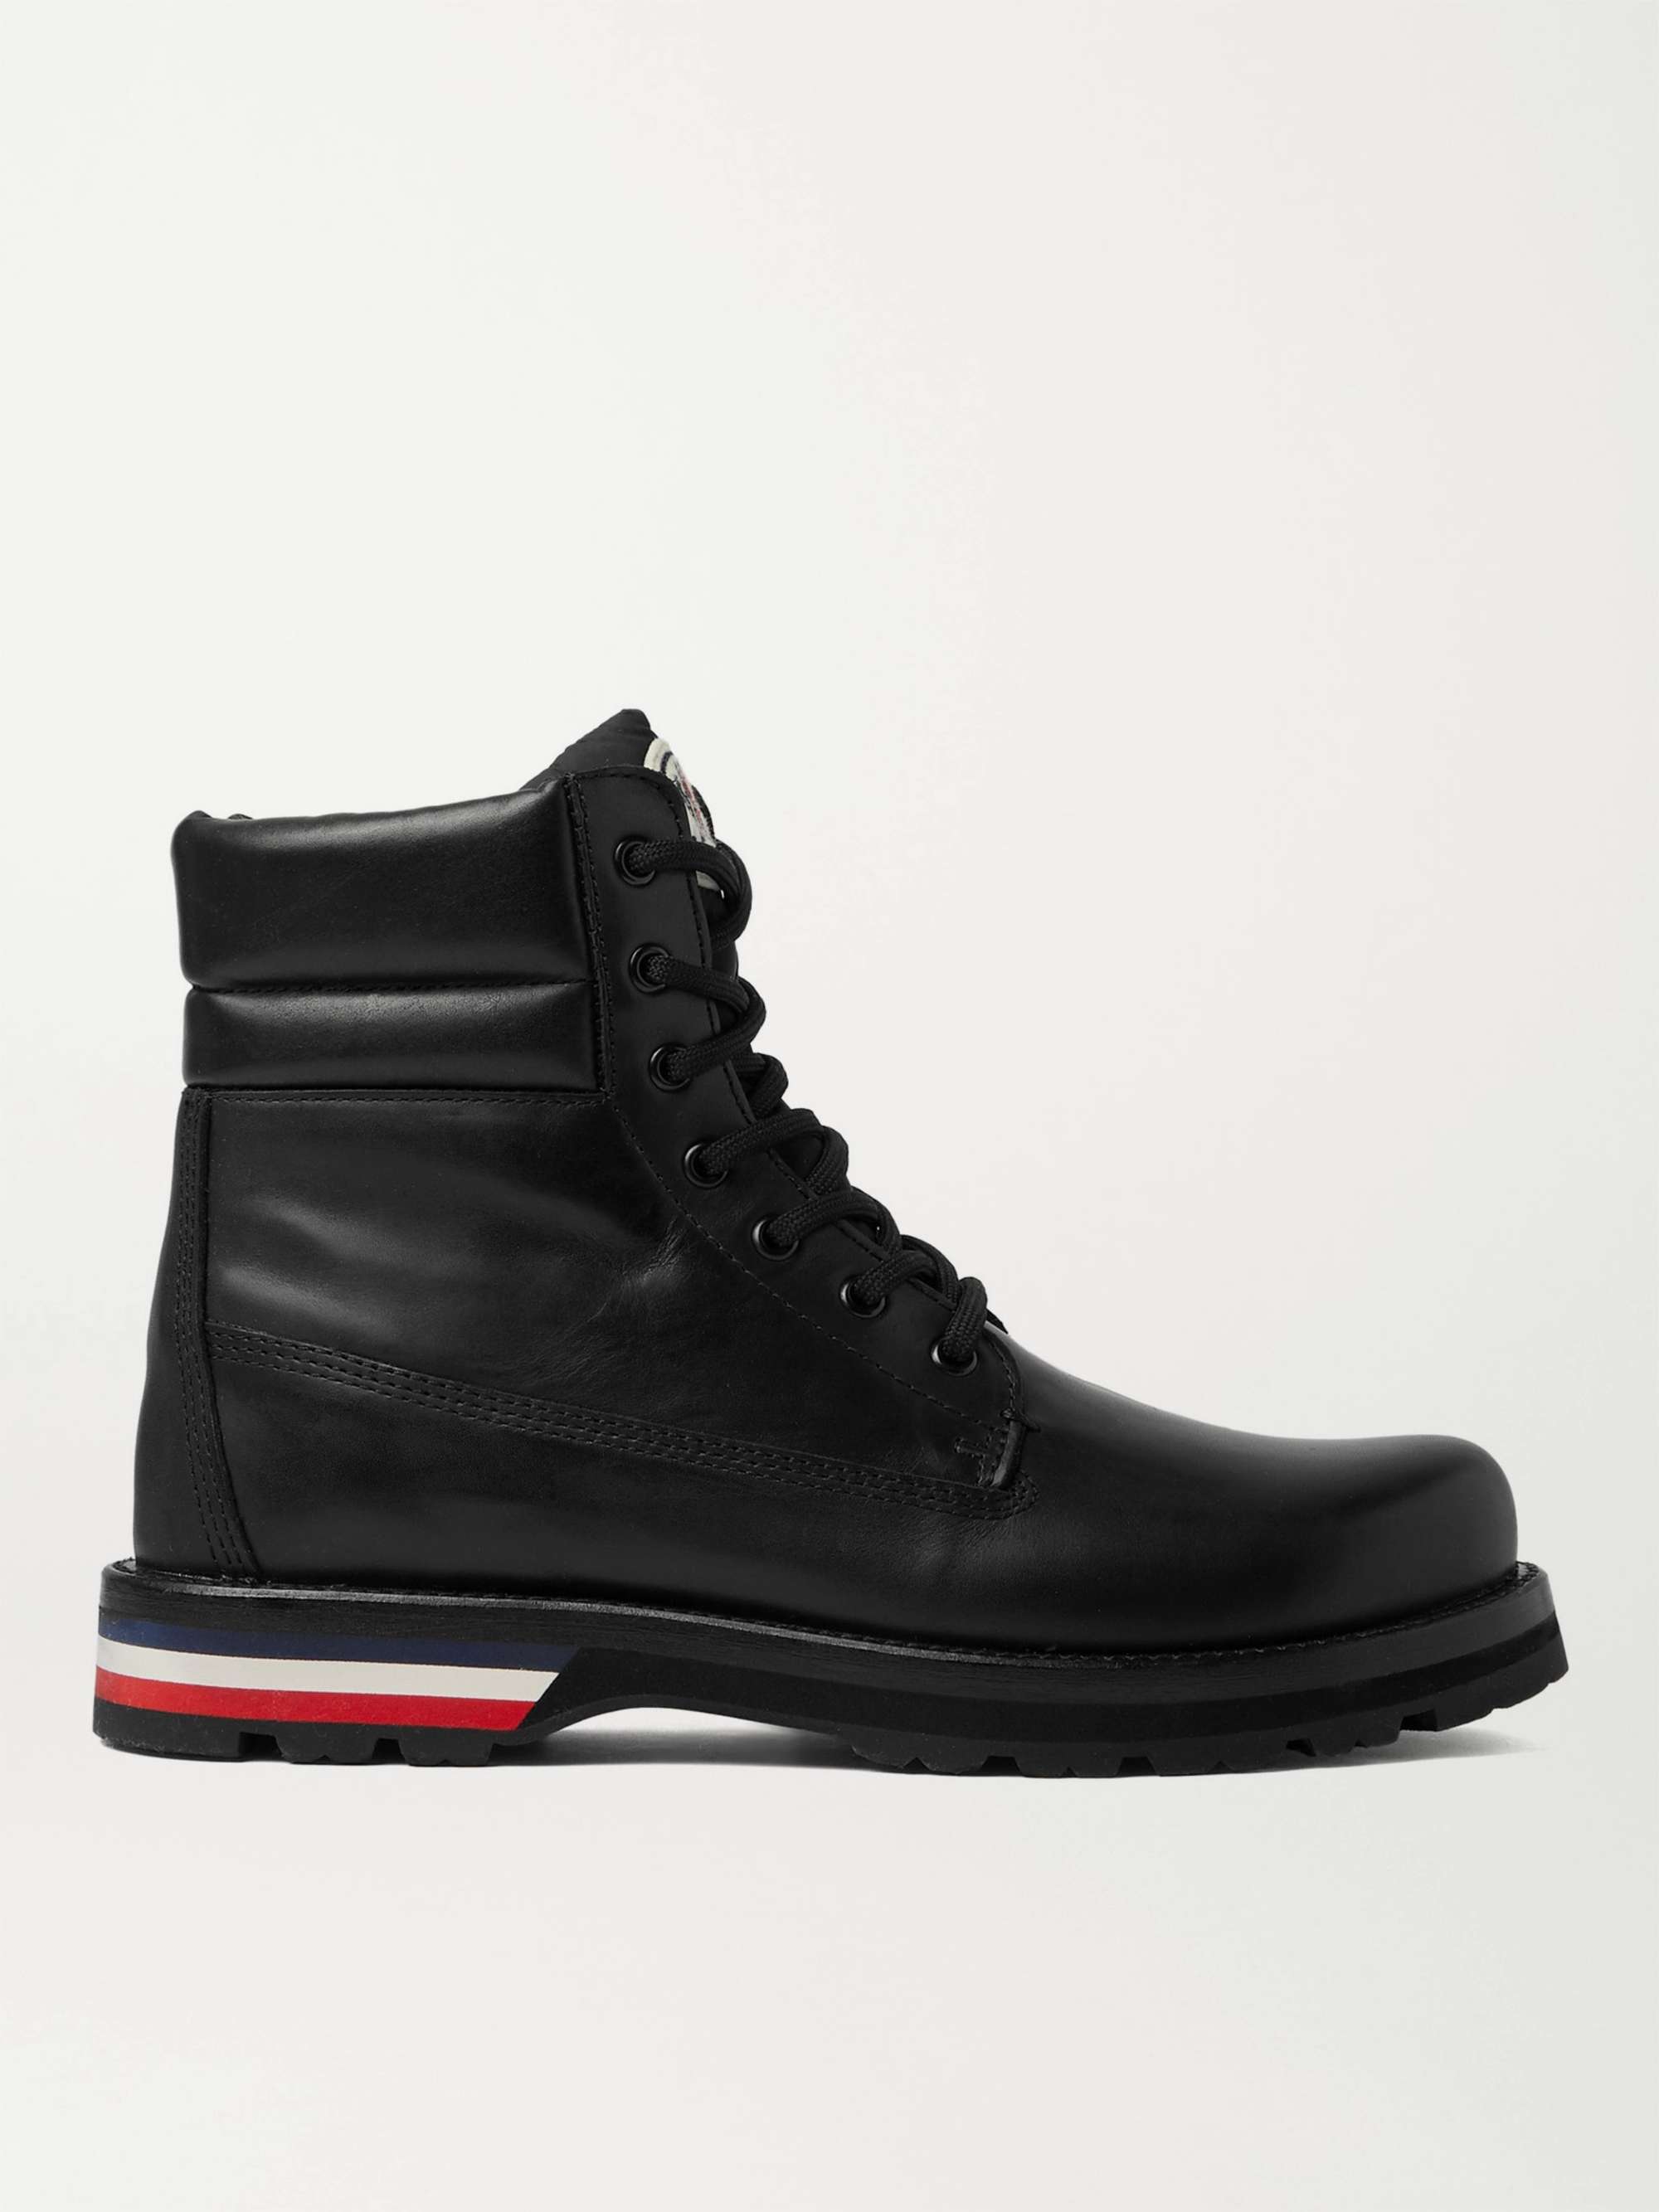 MONCLER Vancouver Striped Leather Hiking Boots | MR PORTER